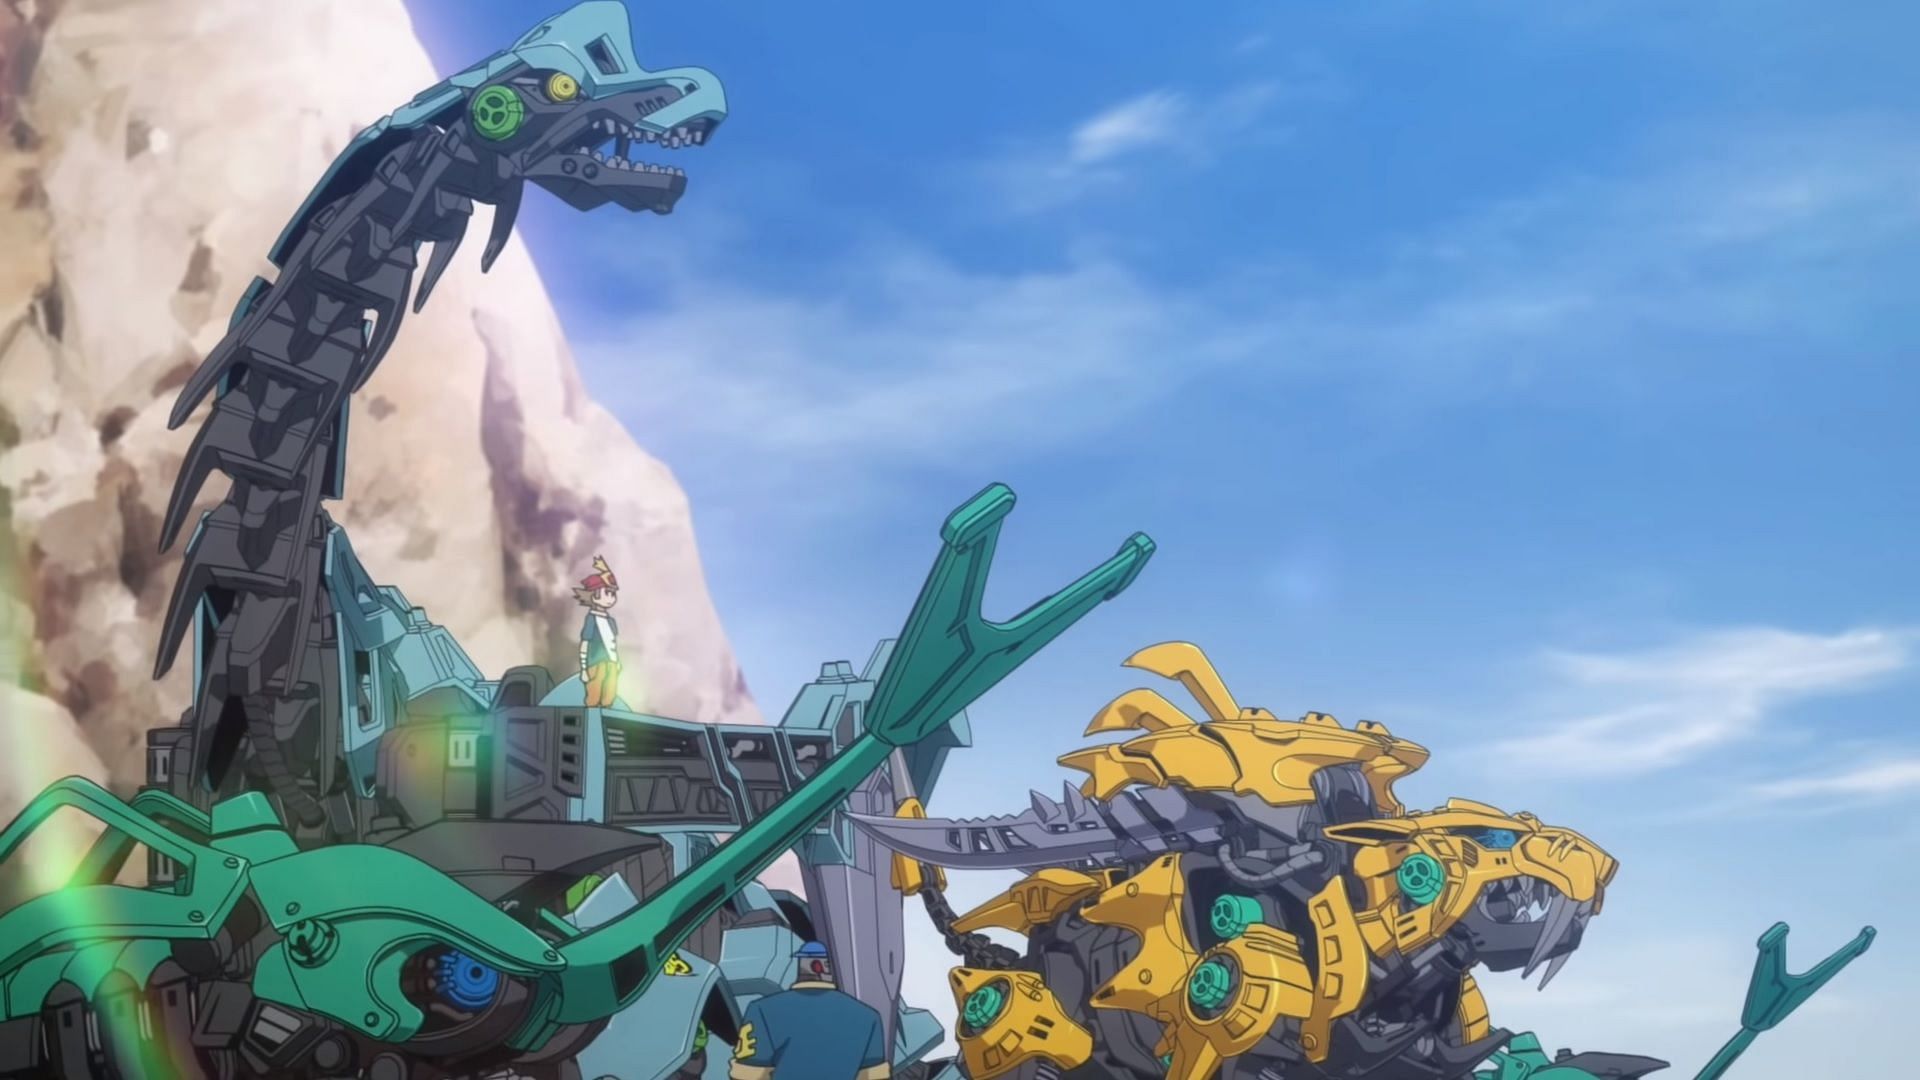 The titular mechas as seen in the Zoids Wild anime series (Image via Allspark Animation)